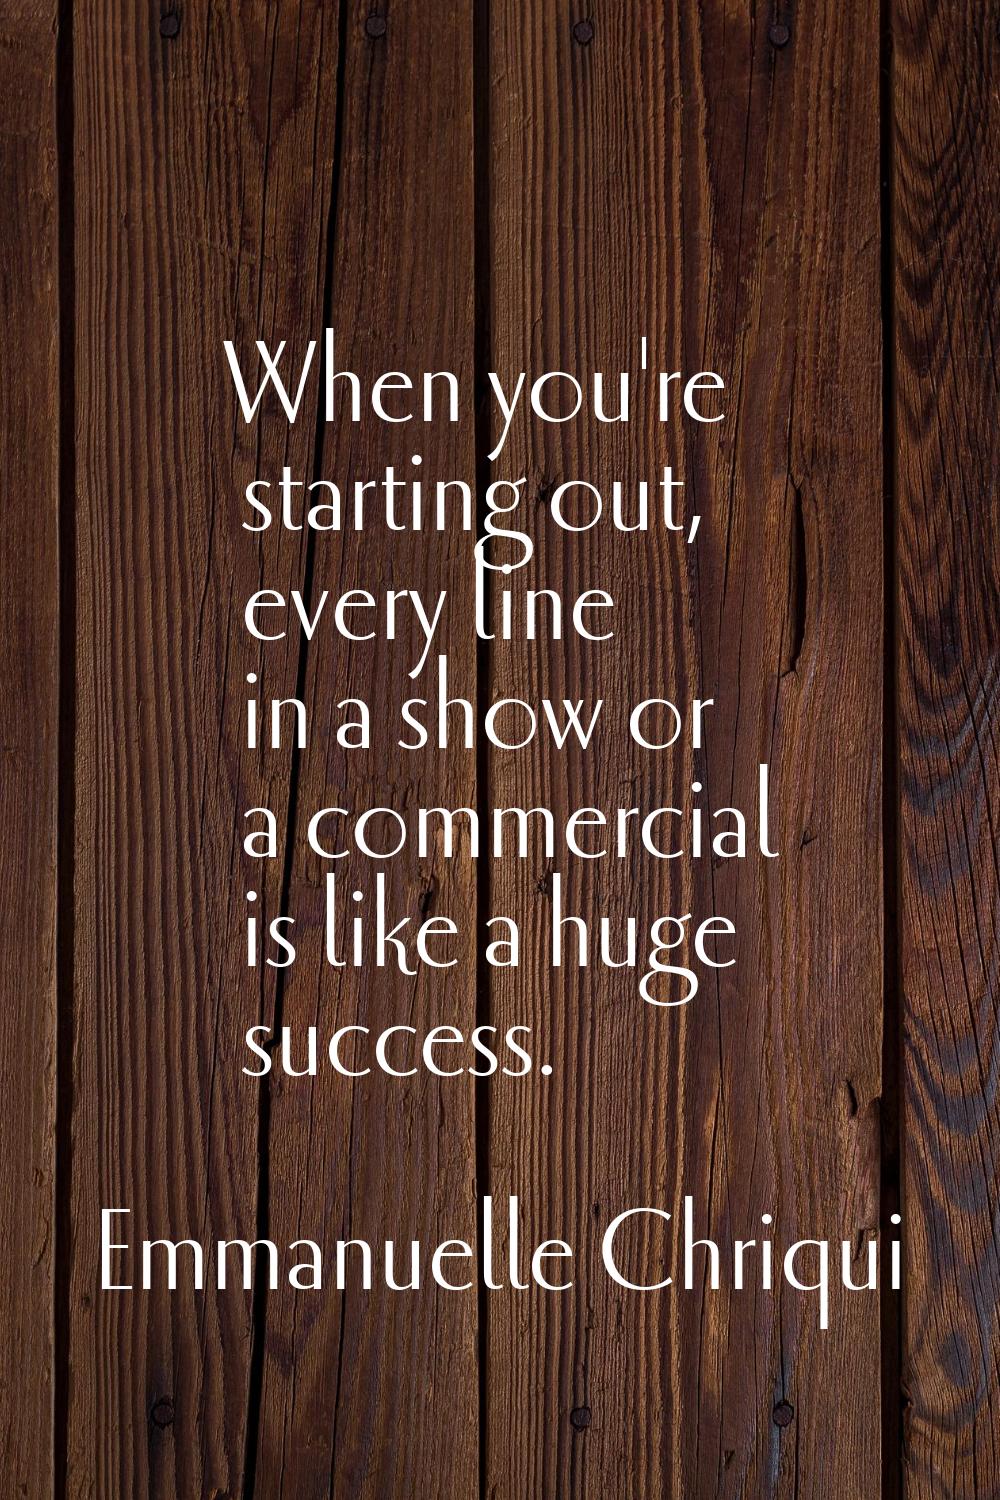 When you're starting out, every line in a show or a commercial is like a huge success.